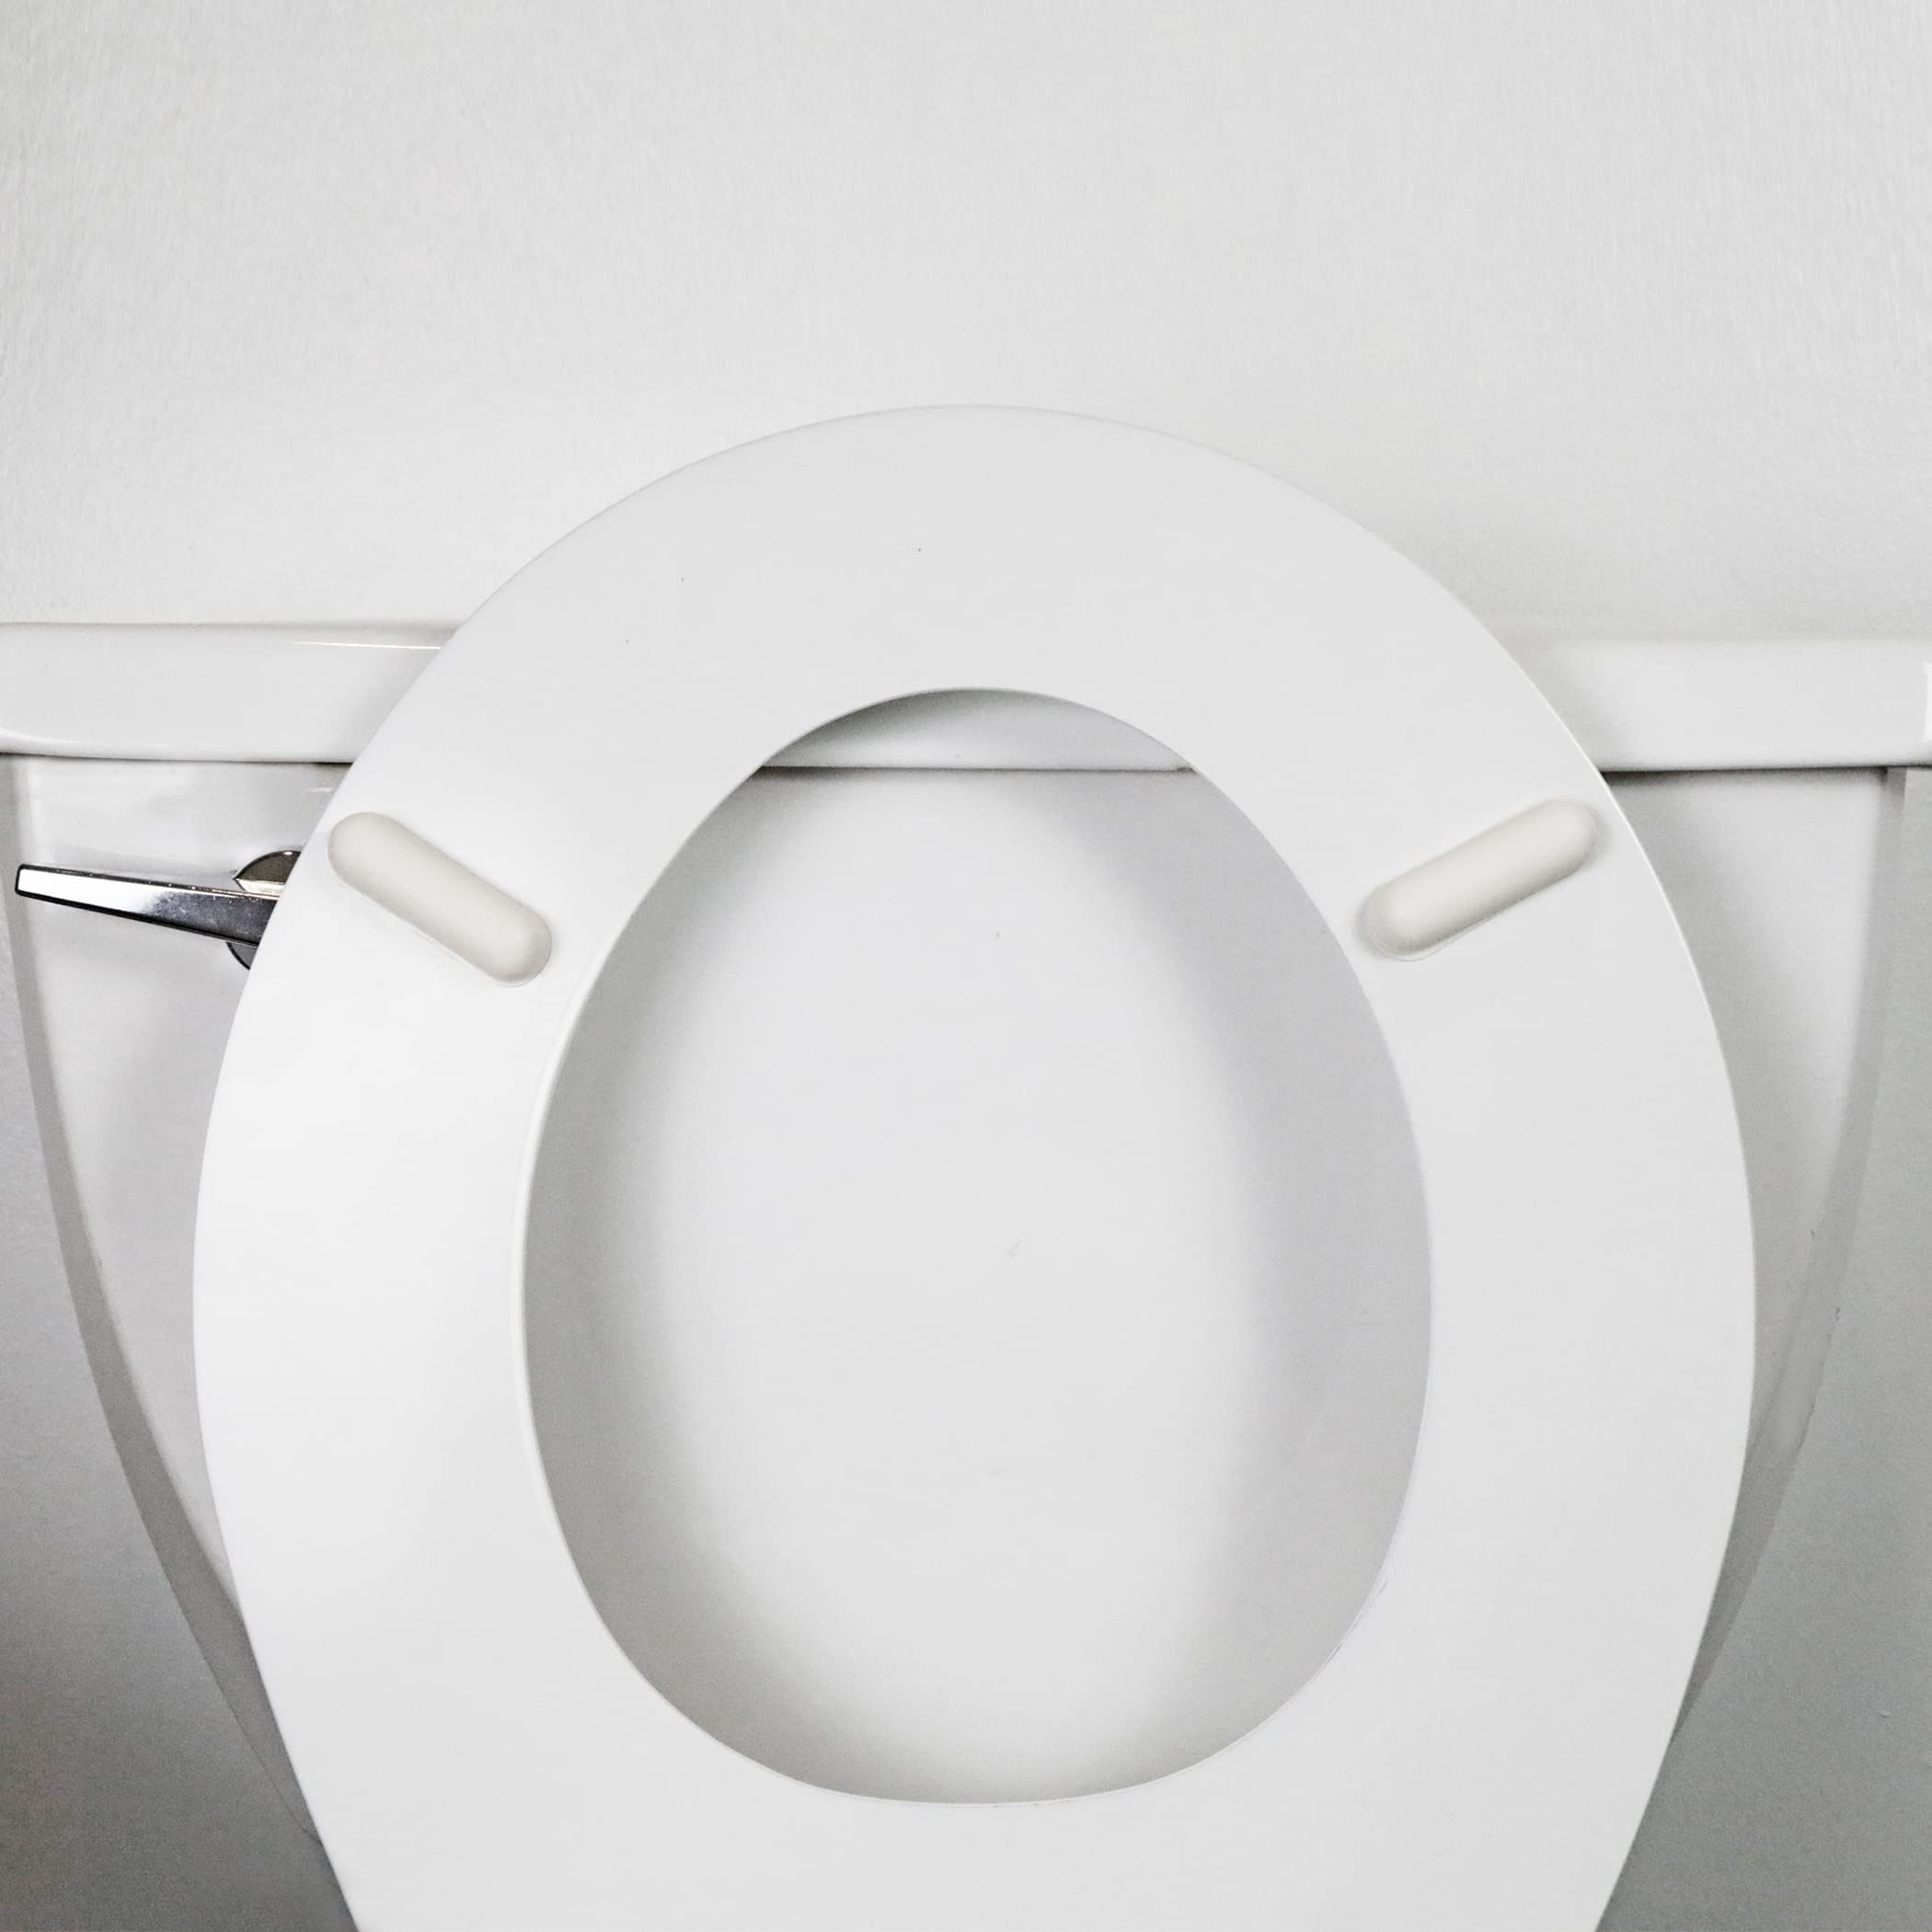 Danco 10062 Universal Bumper, for Use with Toilet Seats, Rubber, 1 Pack, White